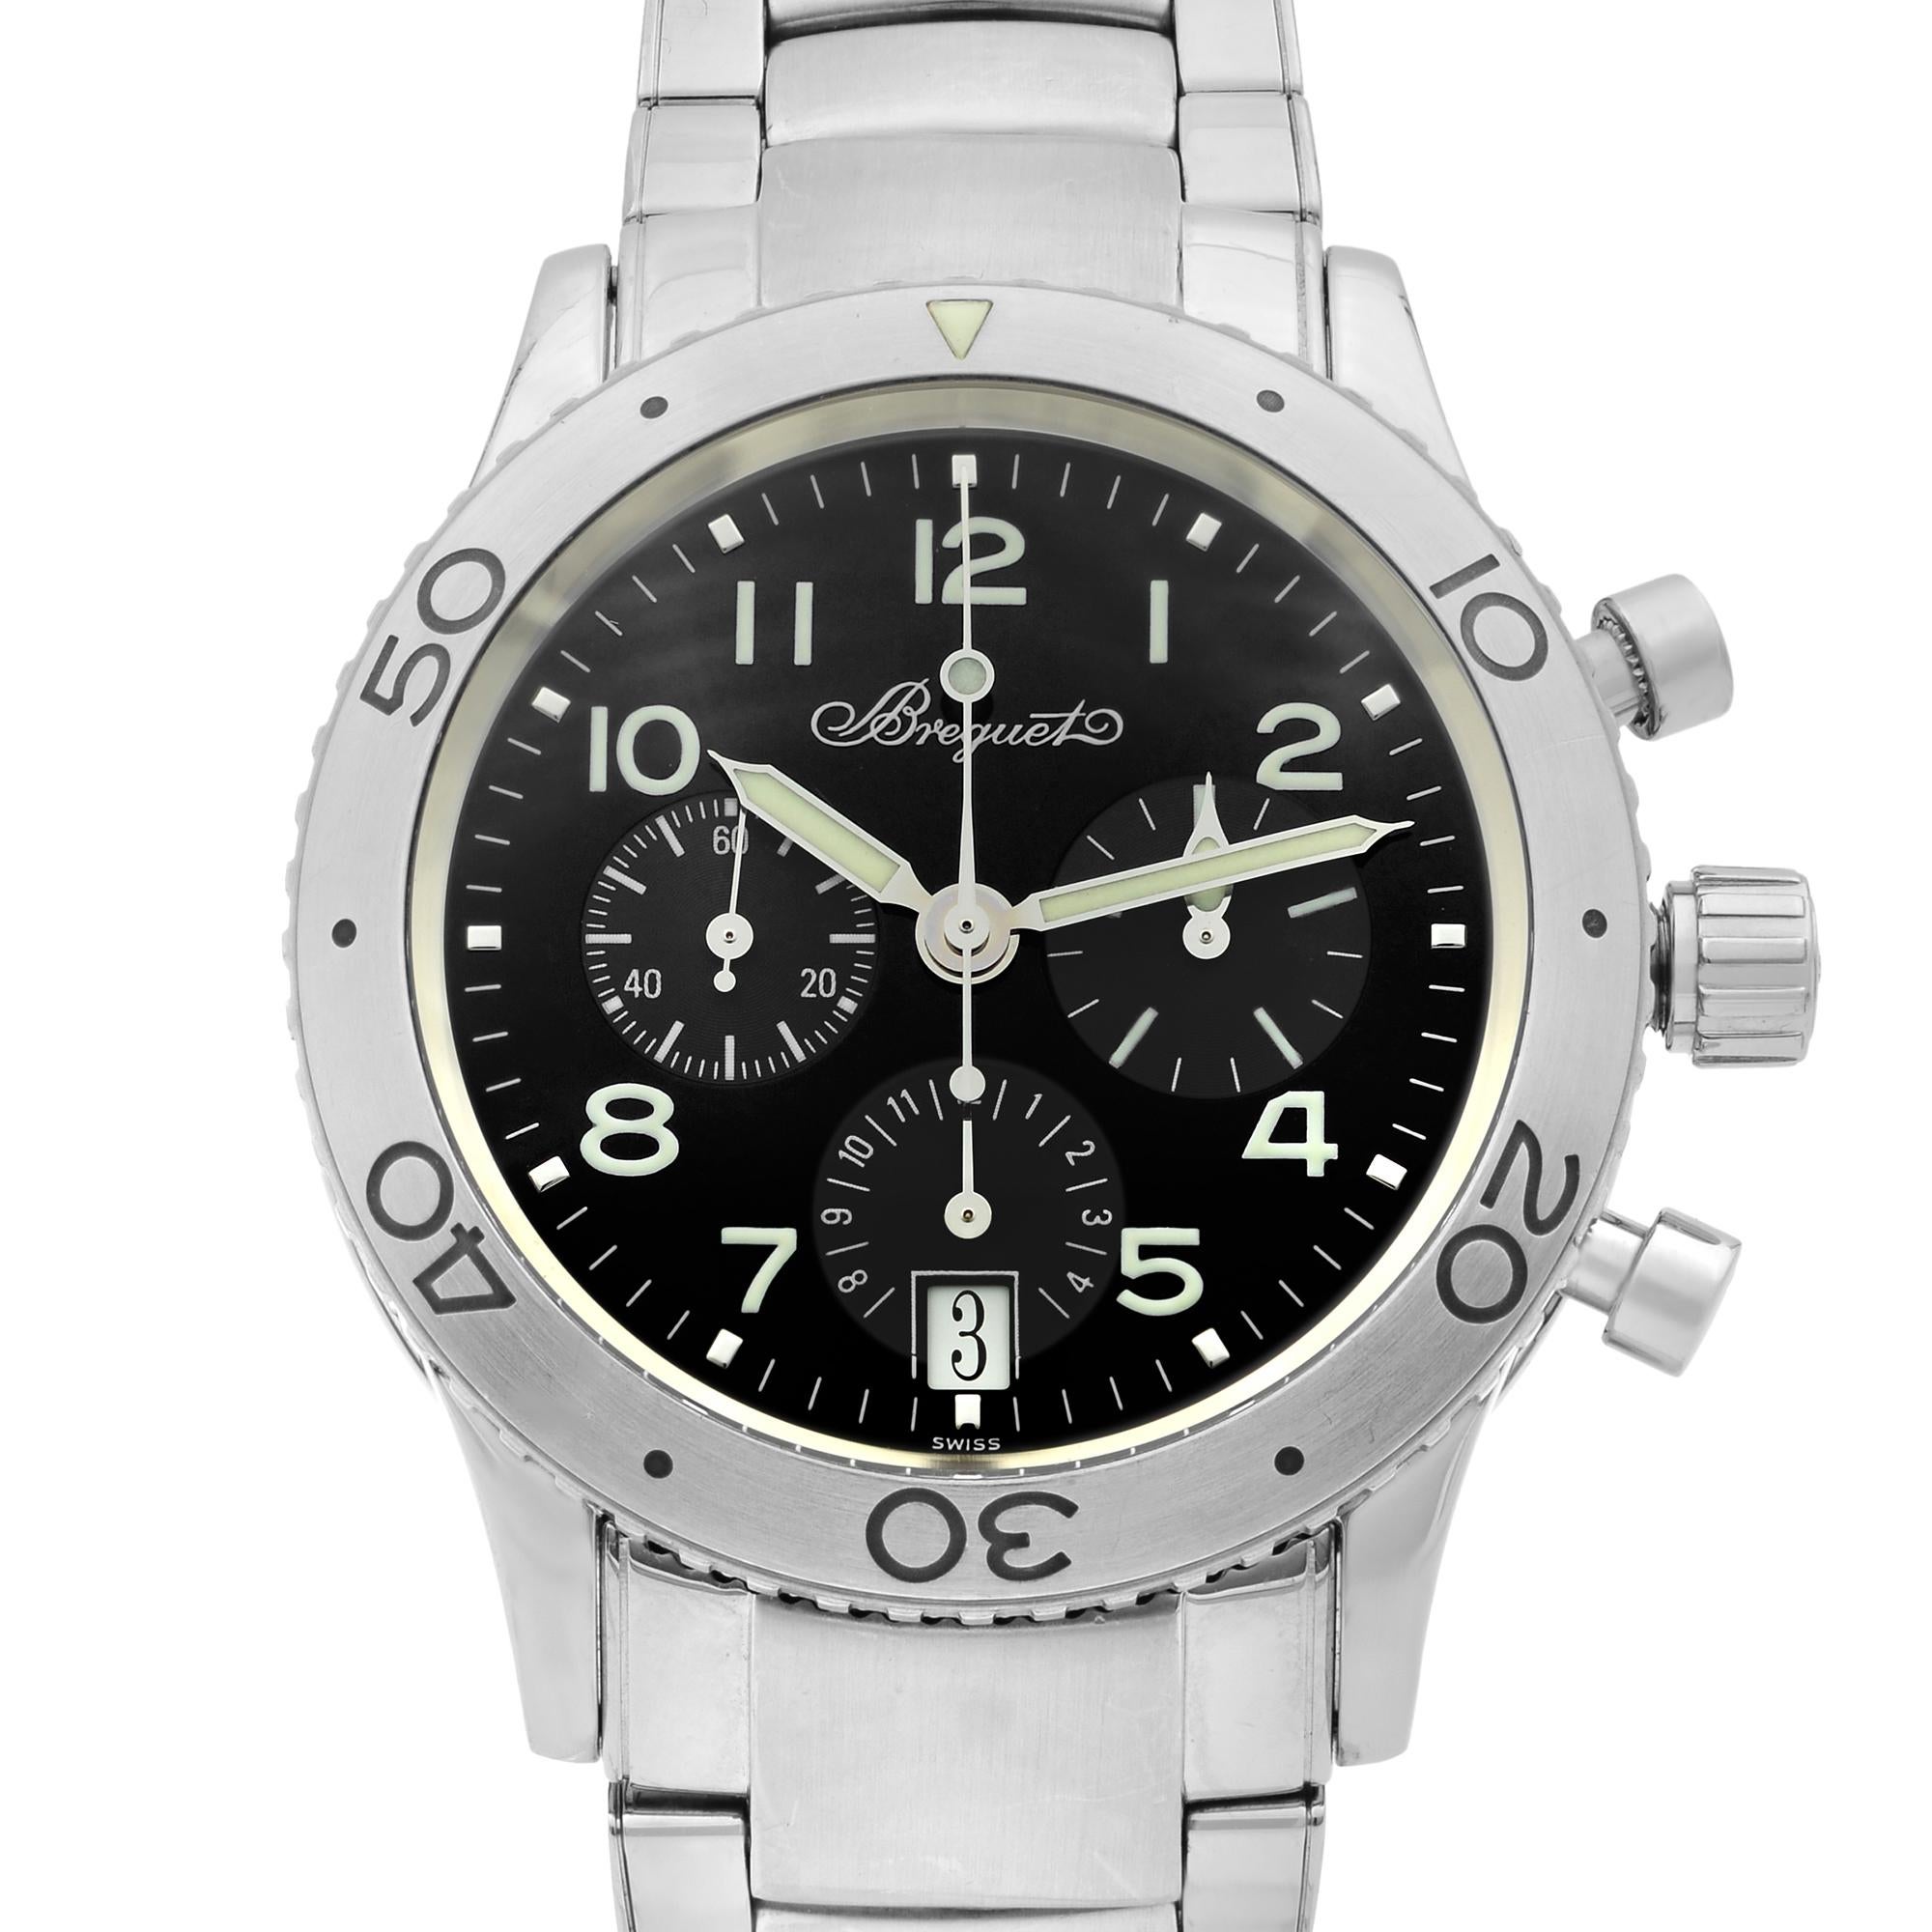 This pre-owned Breguet Type XX 3820ST/H2/SW9 is a beautiful men's timepiece that is powered by a mechanical (automatic) movement which is cased in a stainless steel case. It has a round shape face, chronograph, chronograph hand, date indicator,